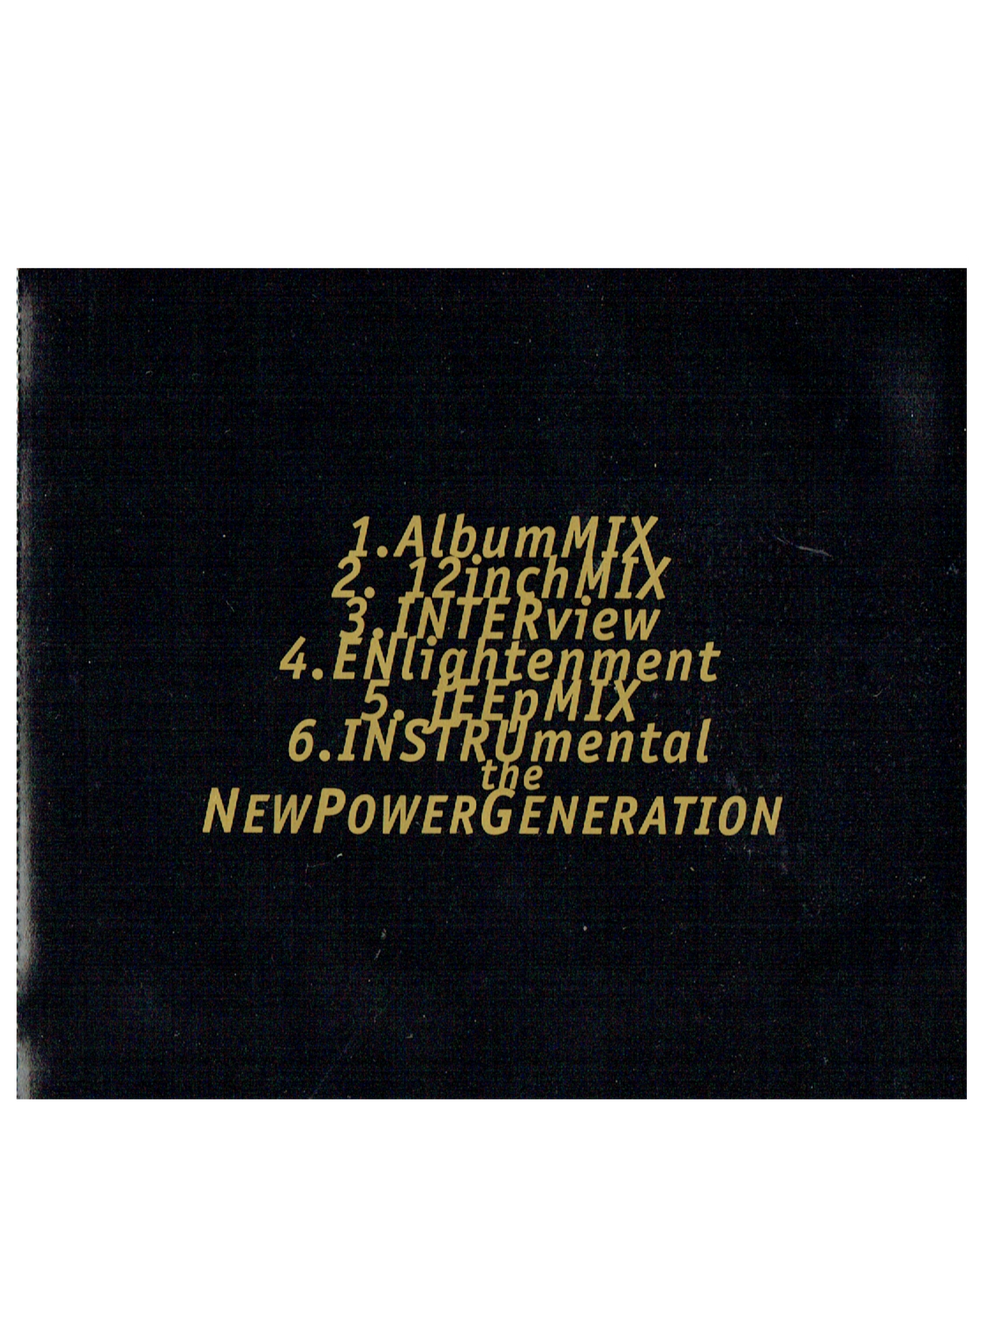 Prince – & New Power Generation 2gether CD Single US Preloved: 1993